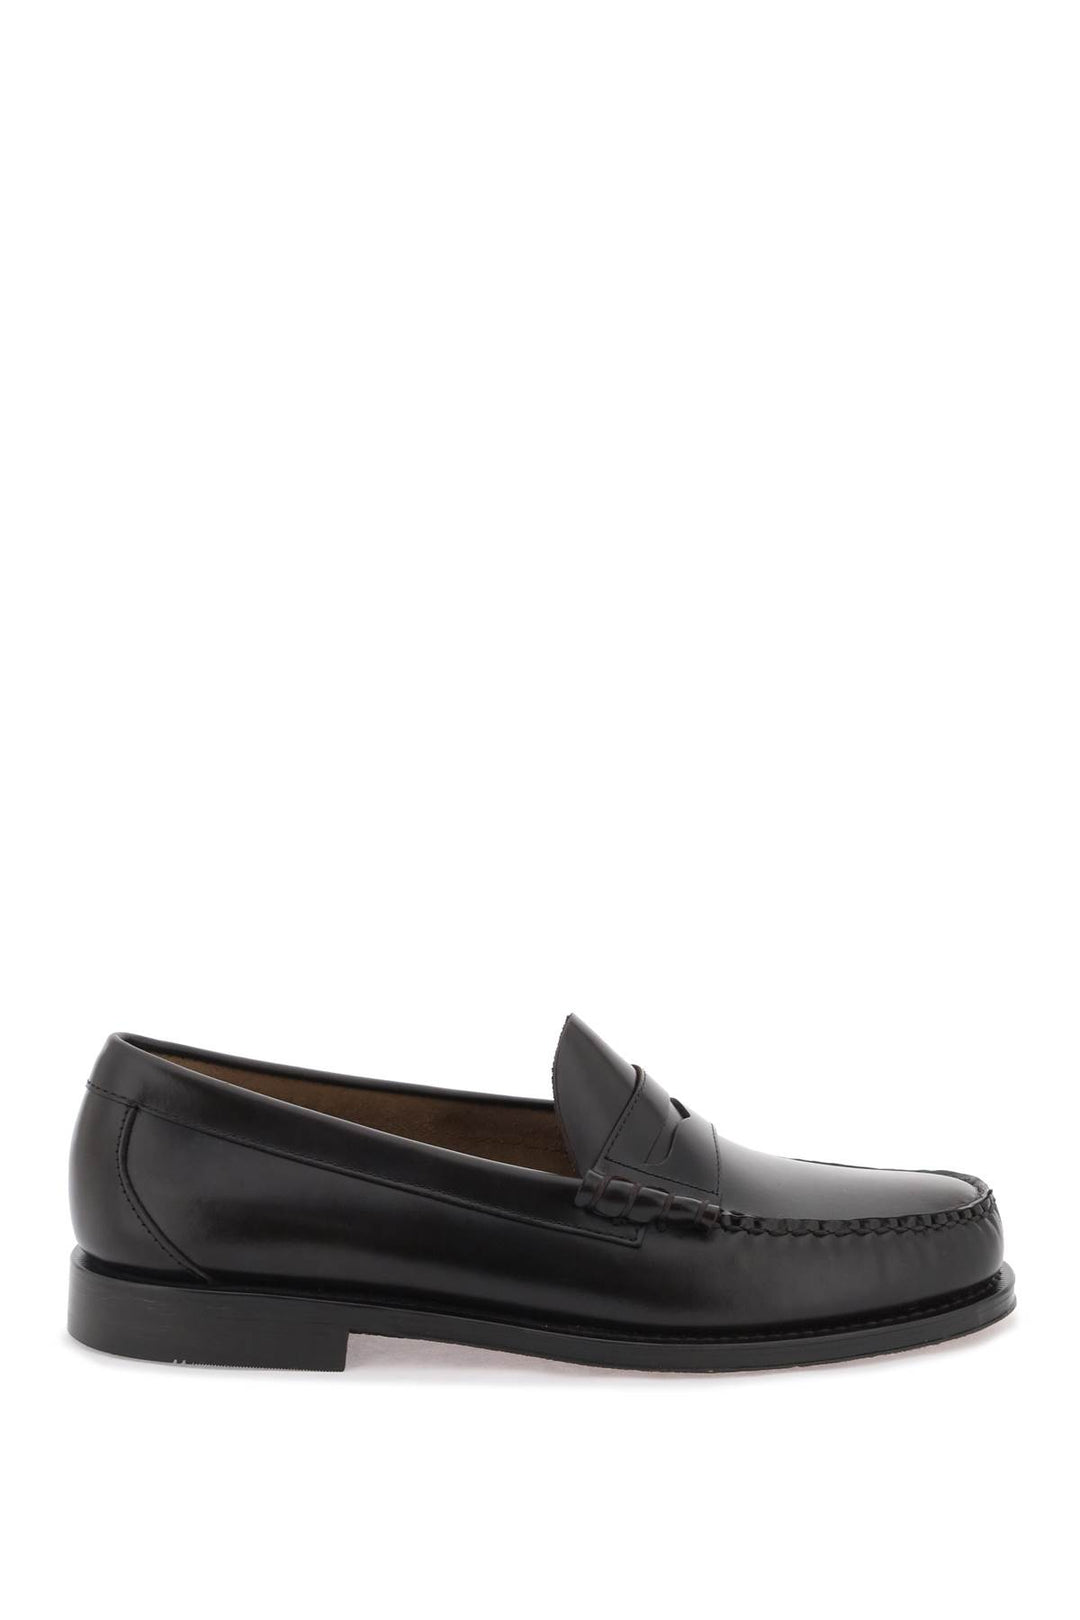 G.H. Bass Weejuns Larson Penny Loafers   Brown